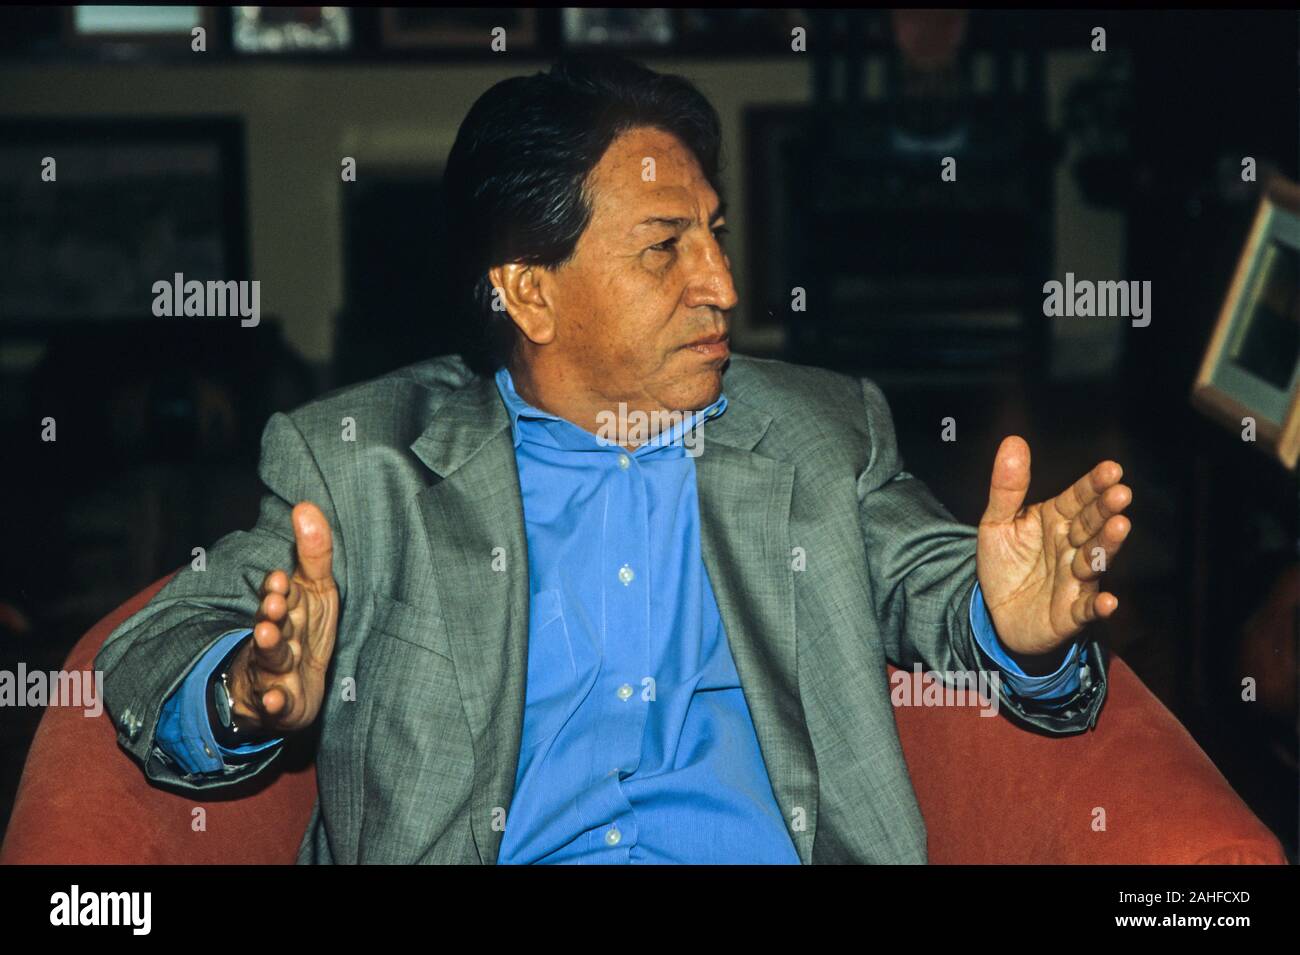 Alejandro Celestino Toledo Manrique is a Peruvian politician who served as the 63rd President of Peru, from 2001 to 2006. Stock Photo